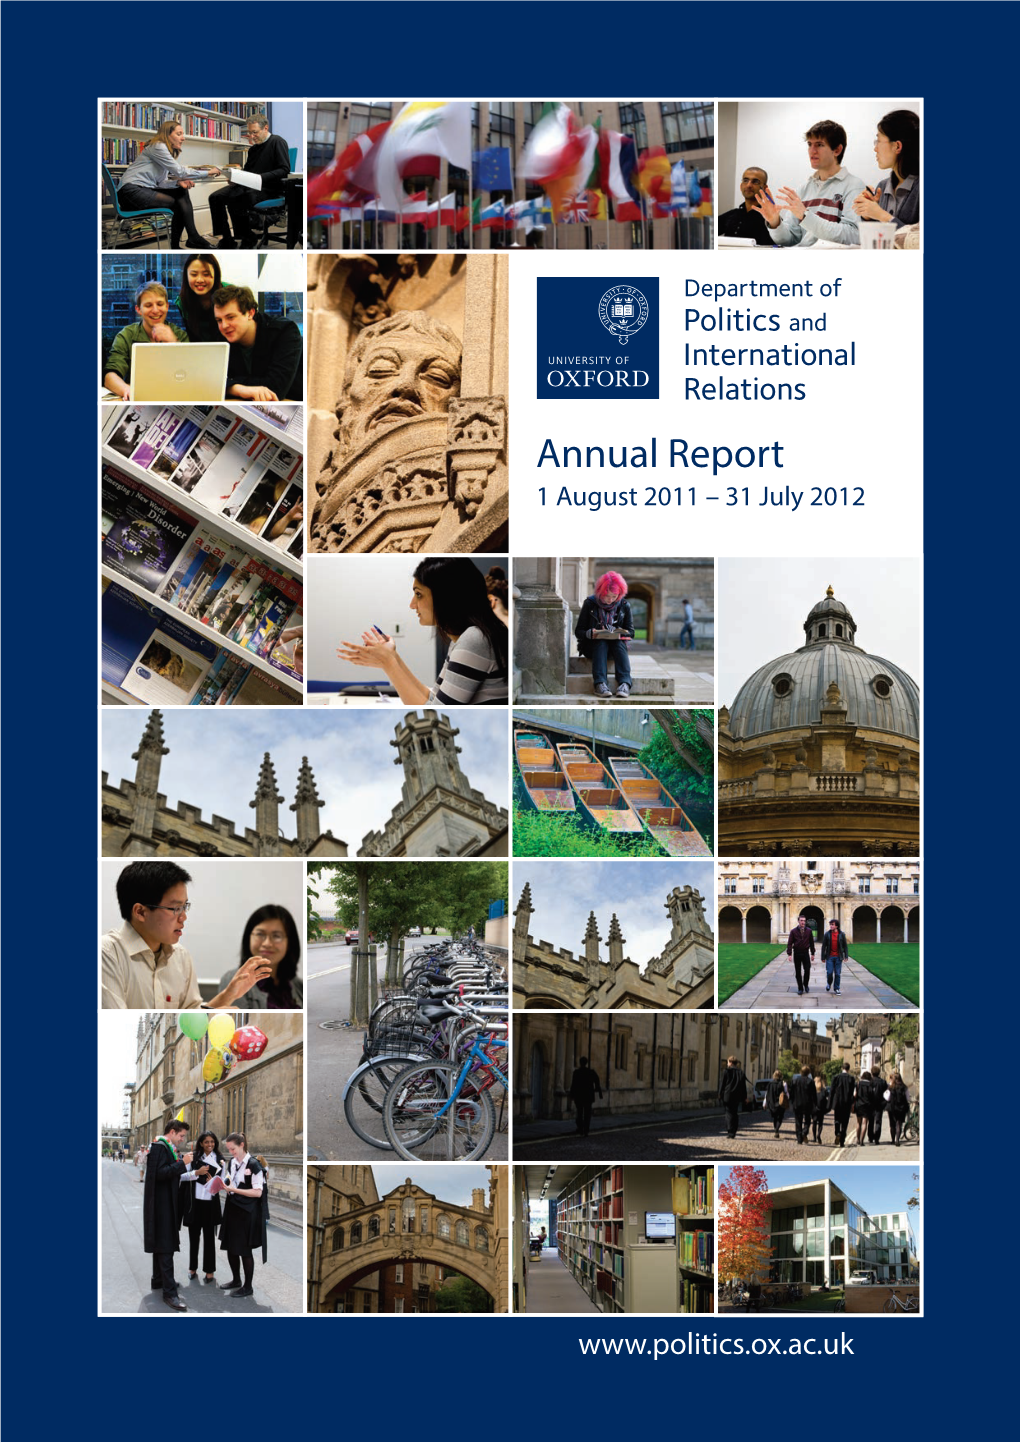 Annual Report 1 August 2011 – 31 July 2012